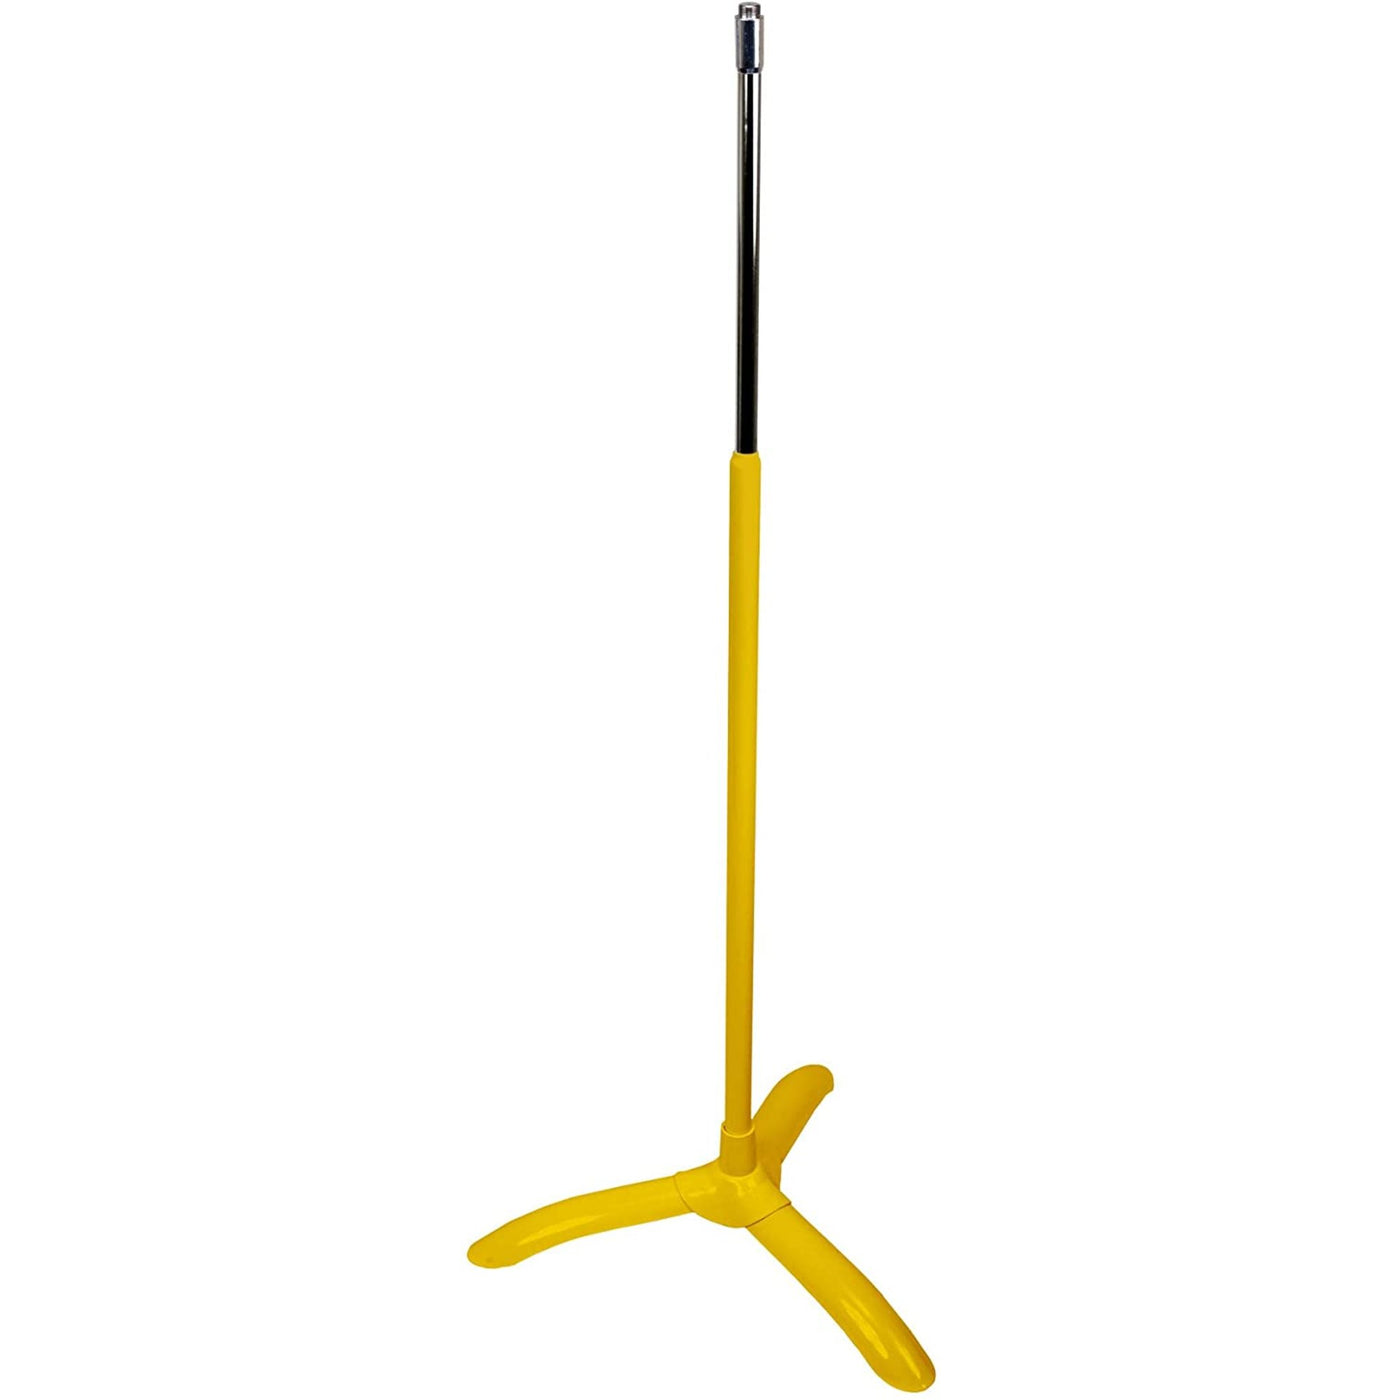 Manhasset Adjustable Height Universal Chorale Microphone Stand, Yellow (3016YEL)